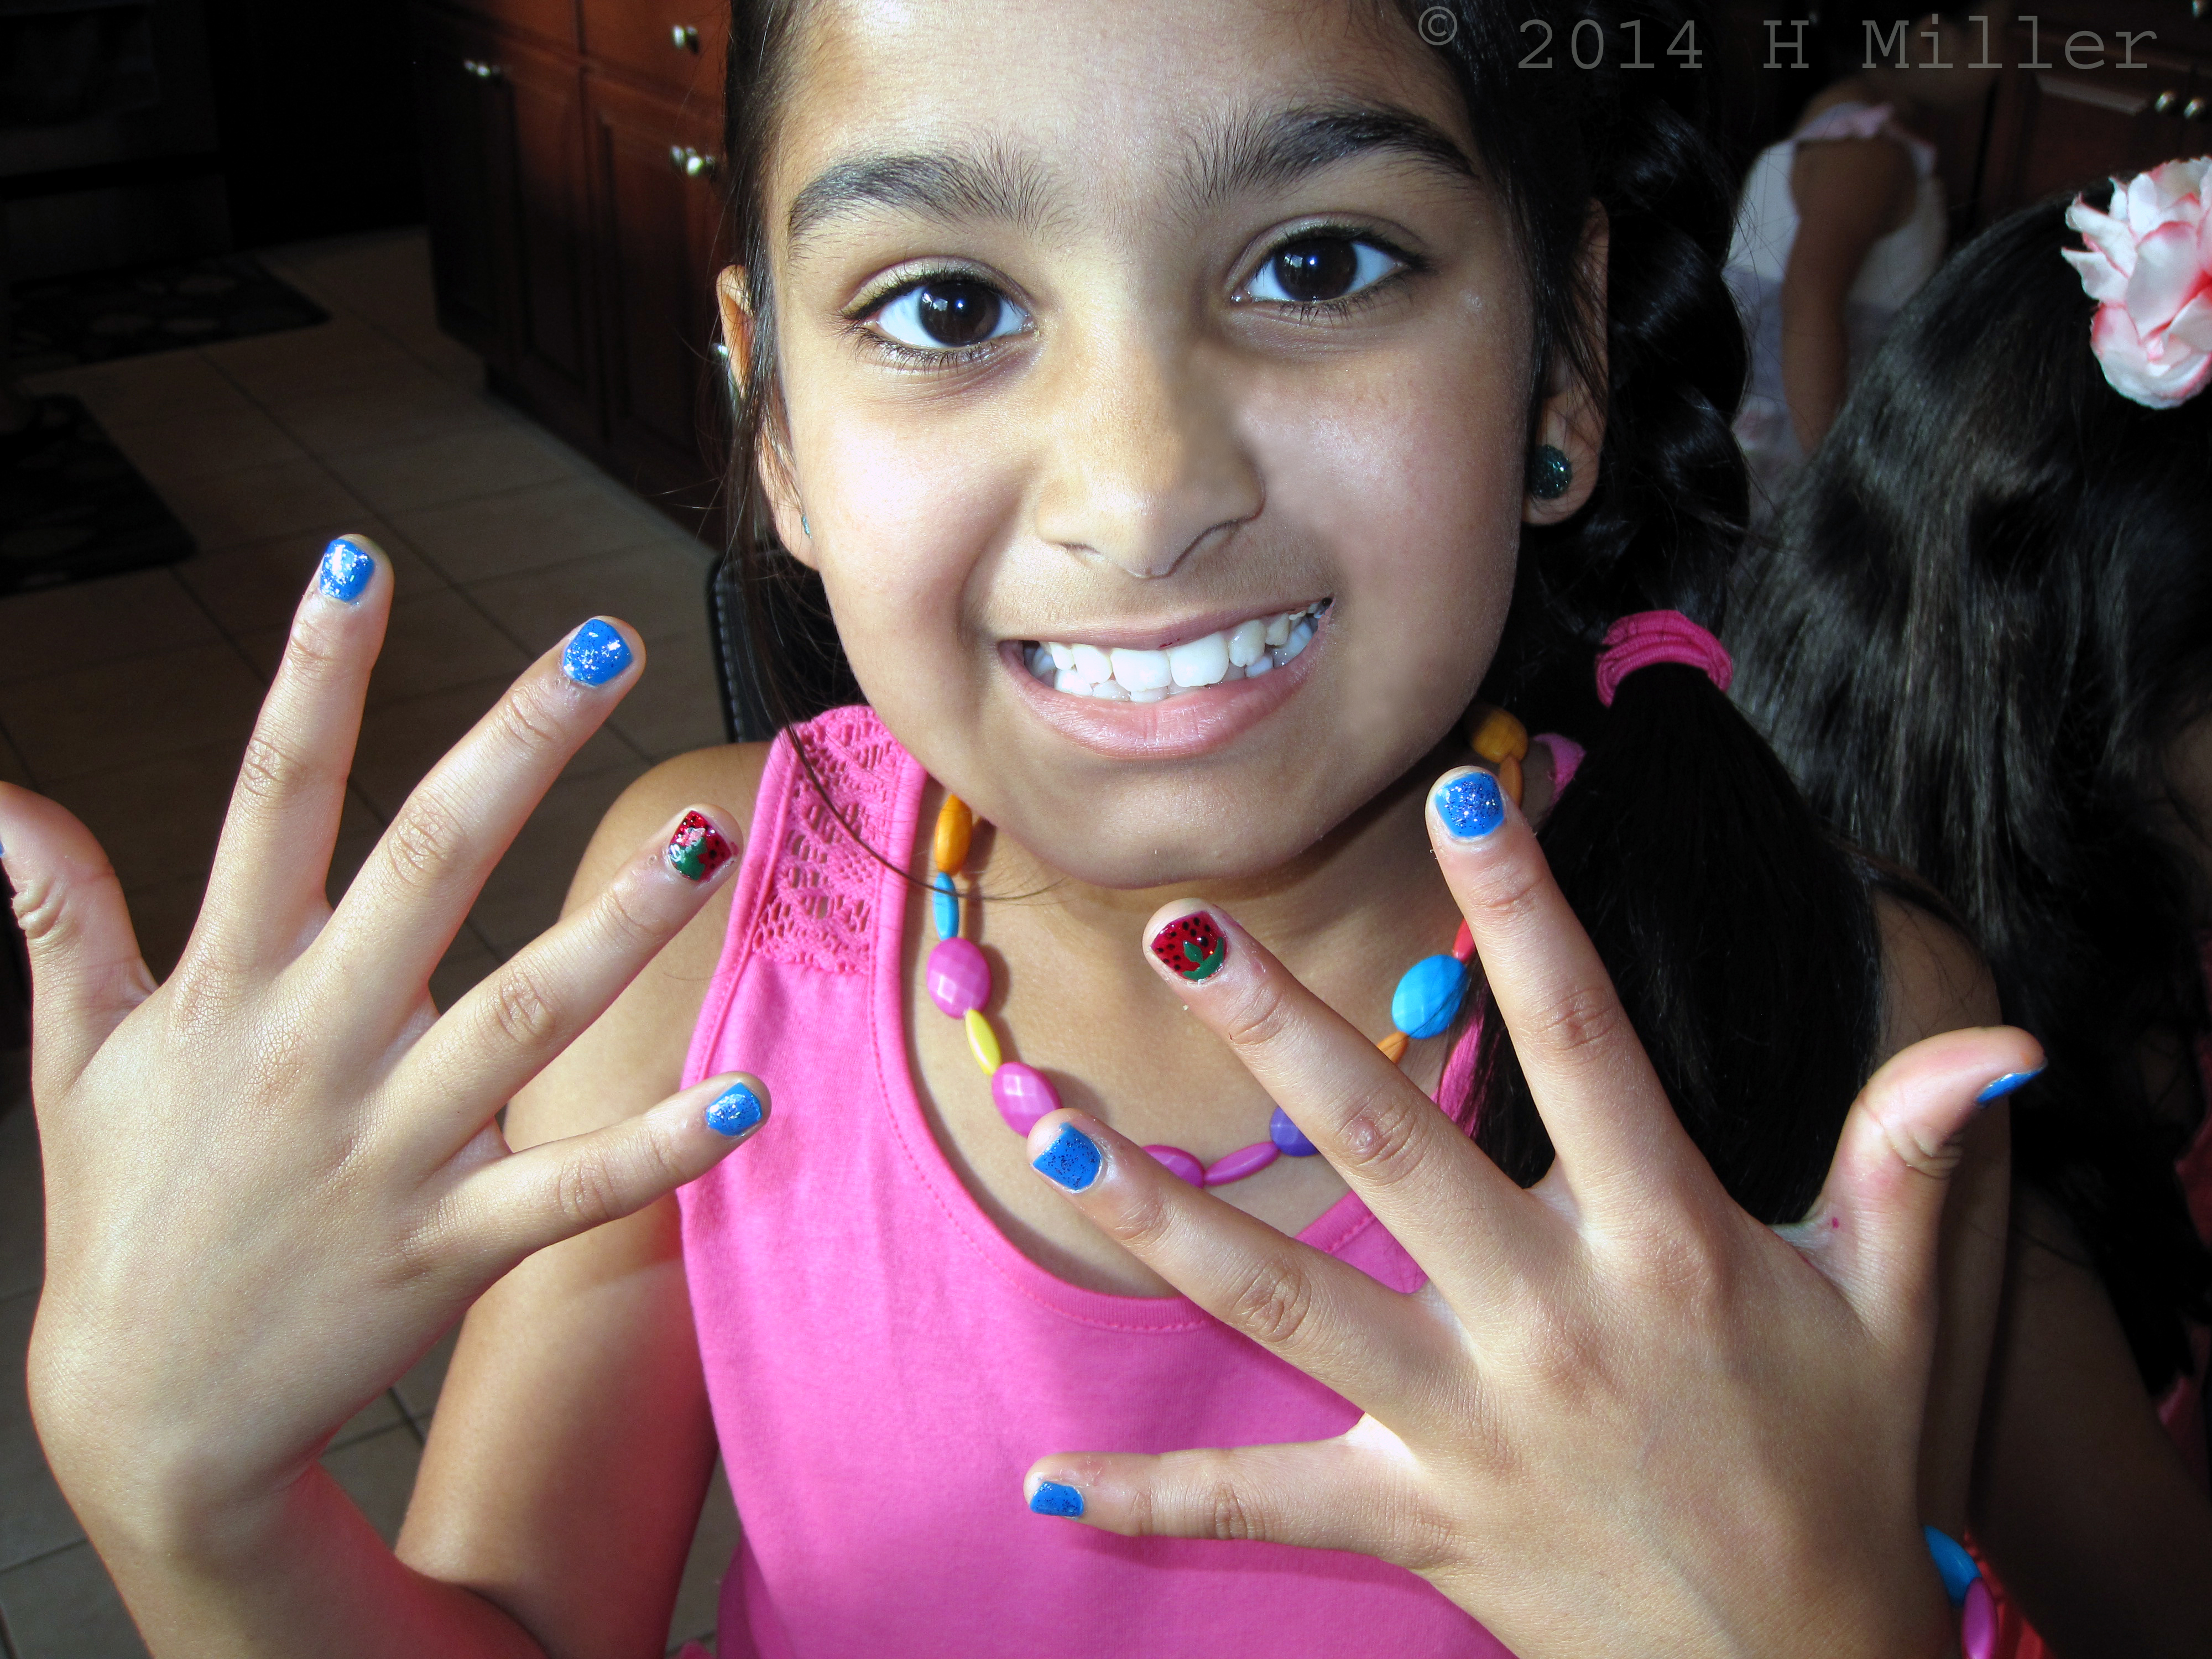 Kids Nail Art Strawberry Mani Looks Real As Could Be! 